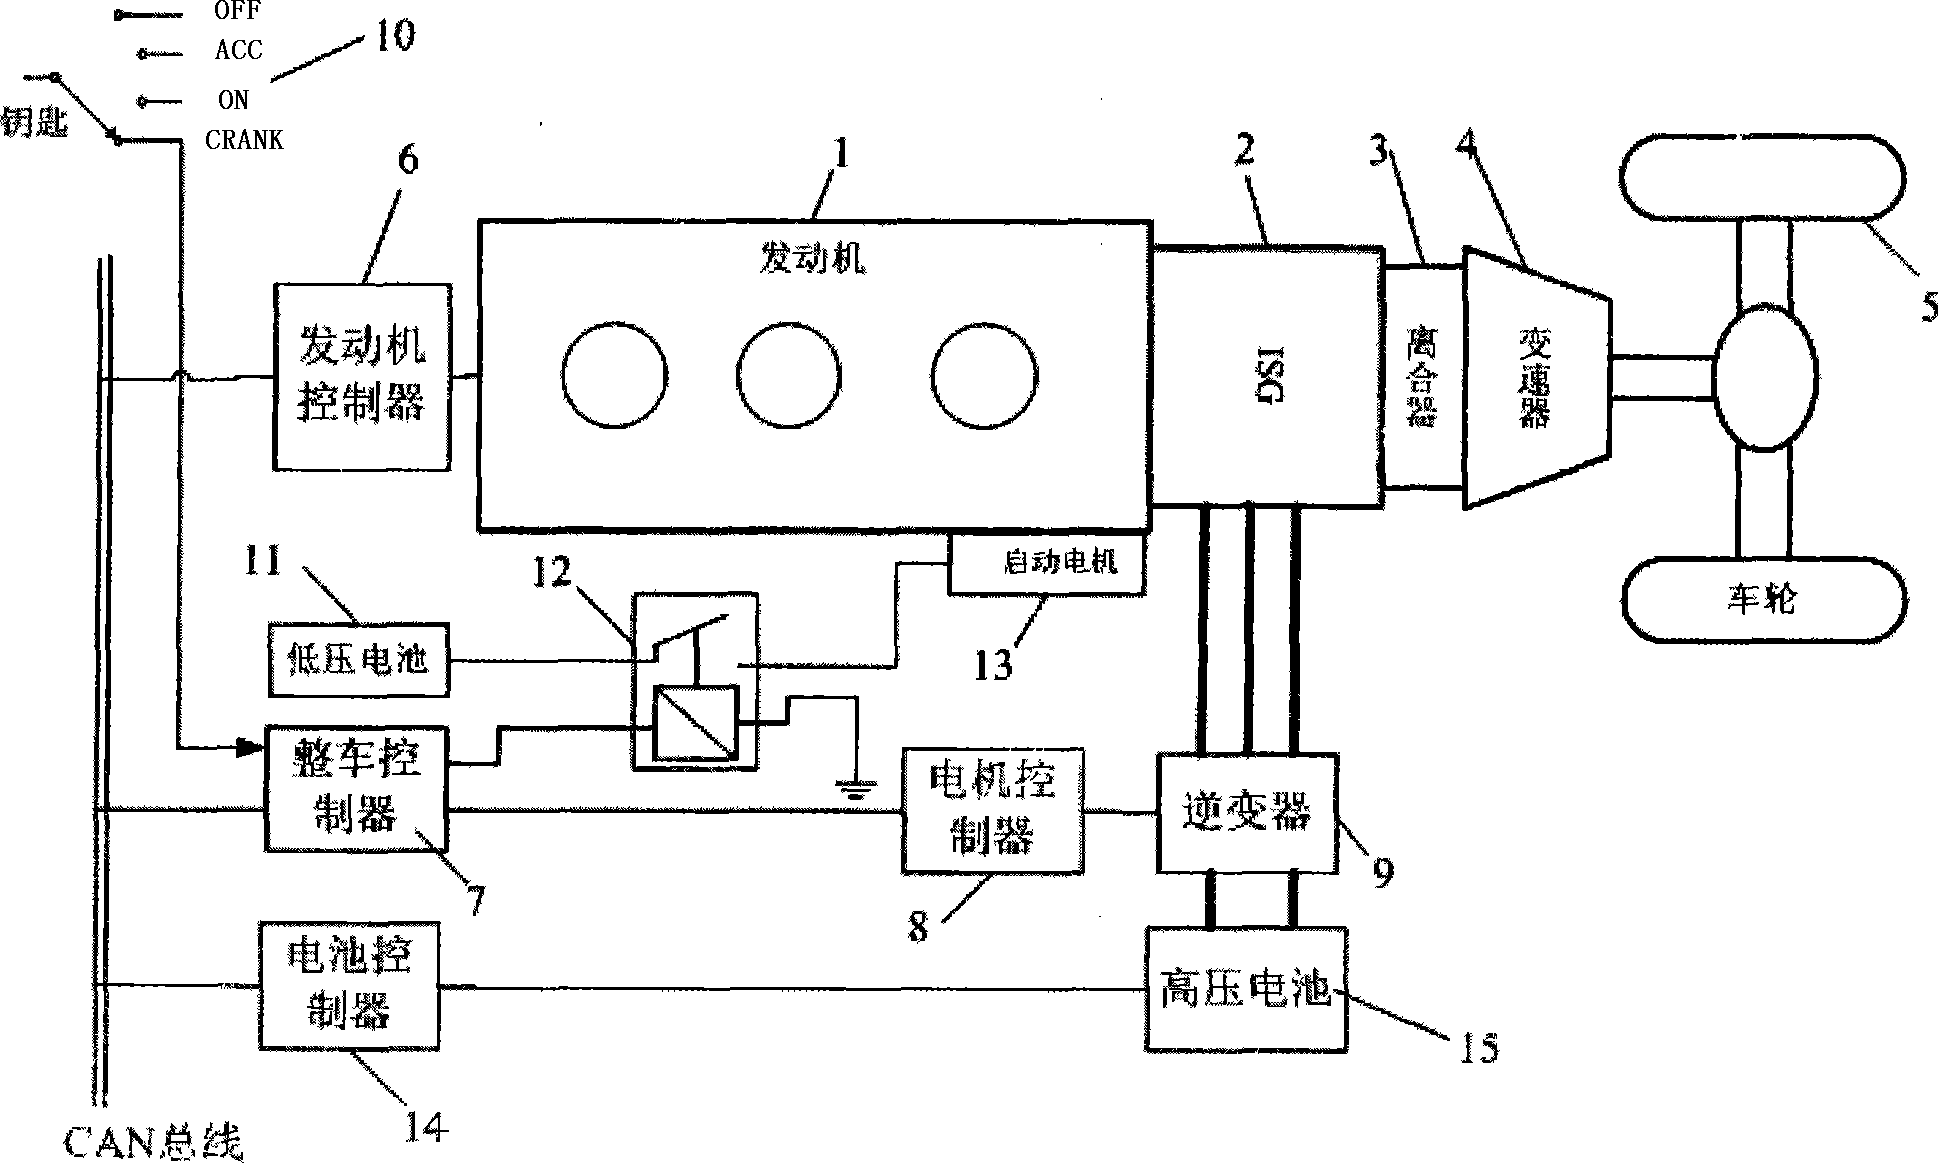 Startup control method of mixed power automobile